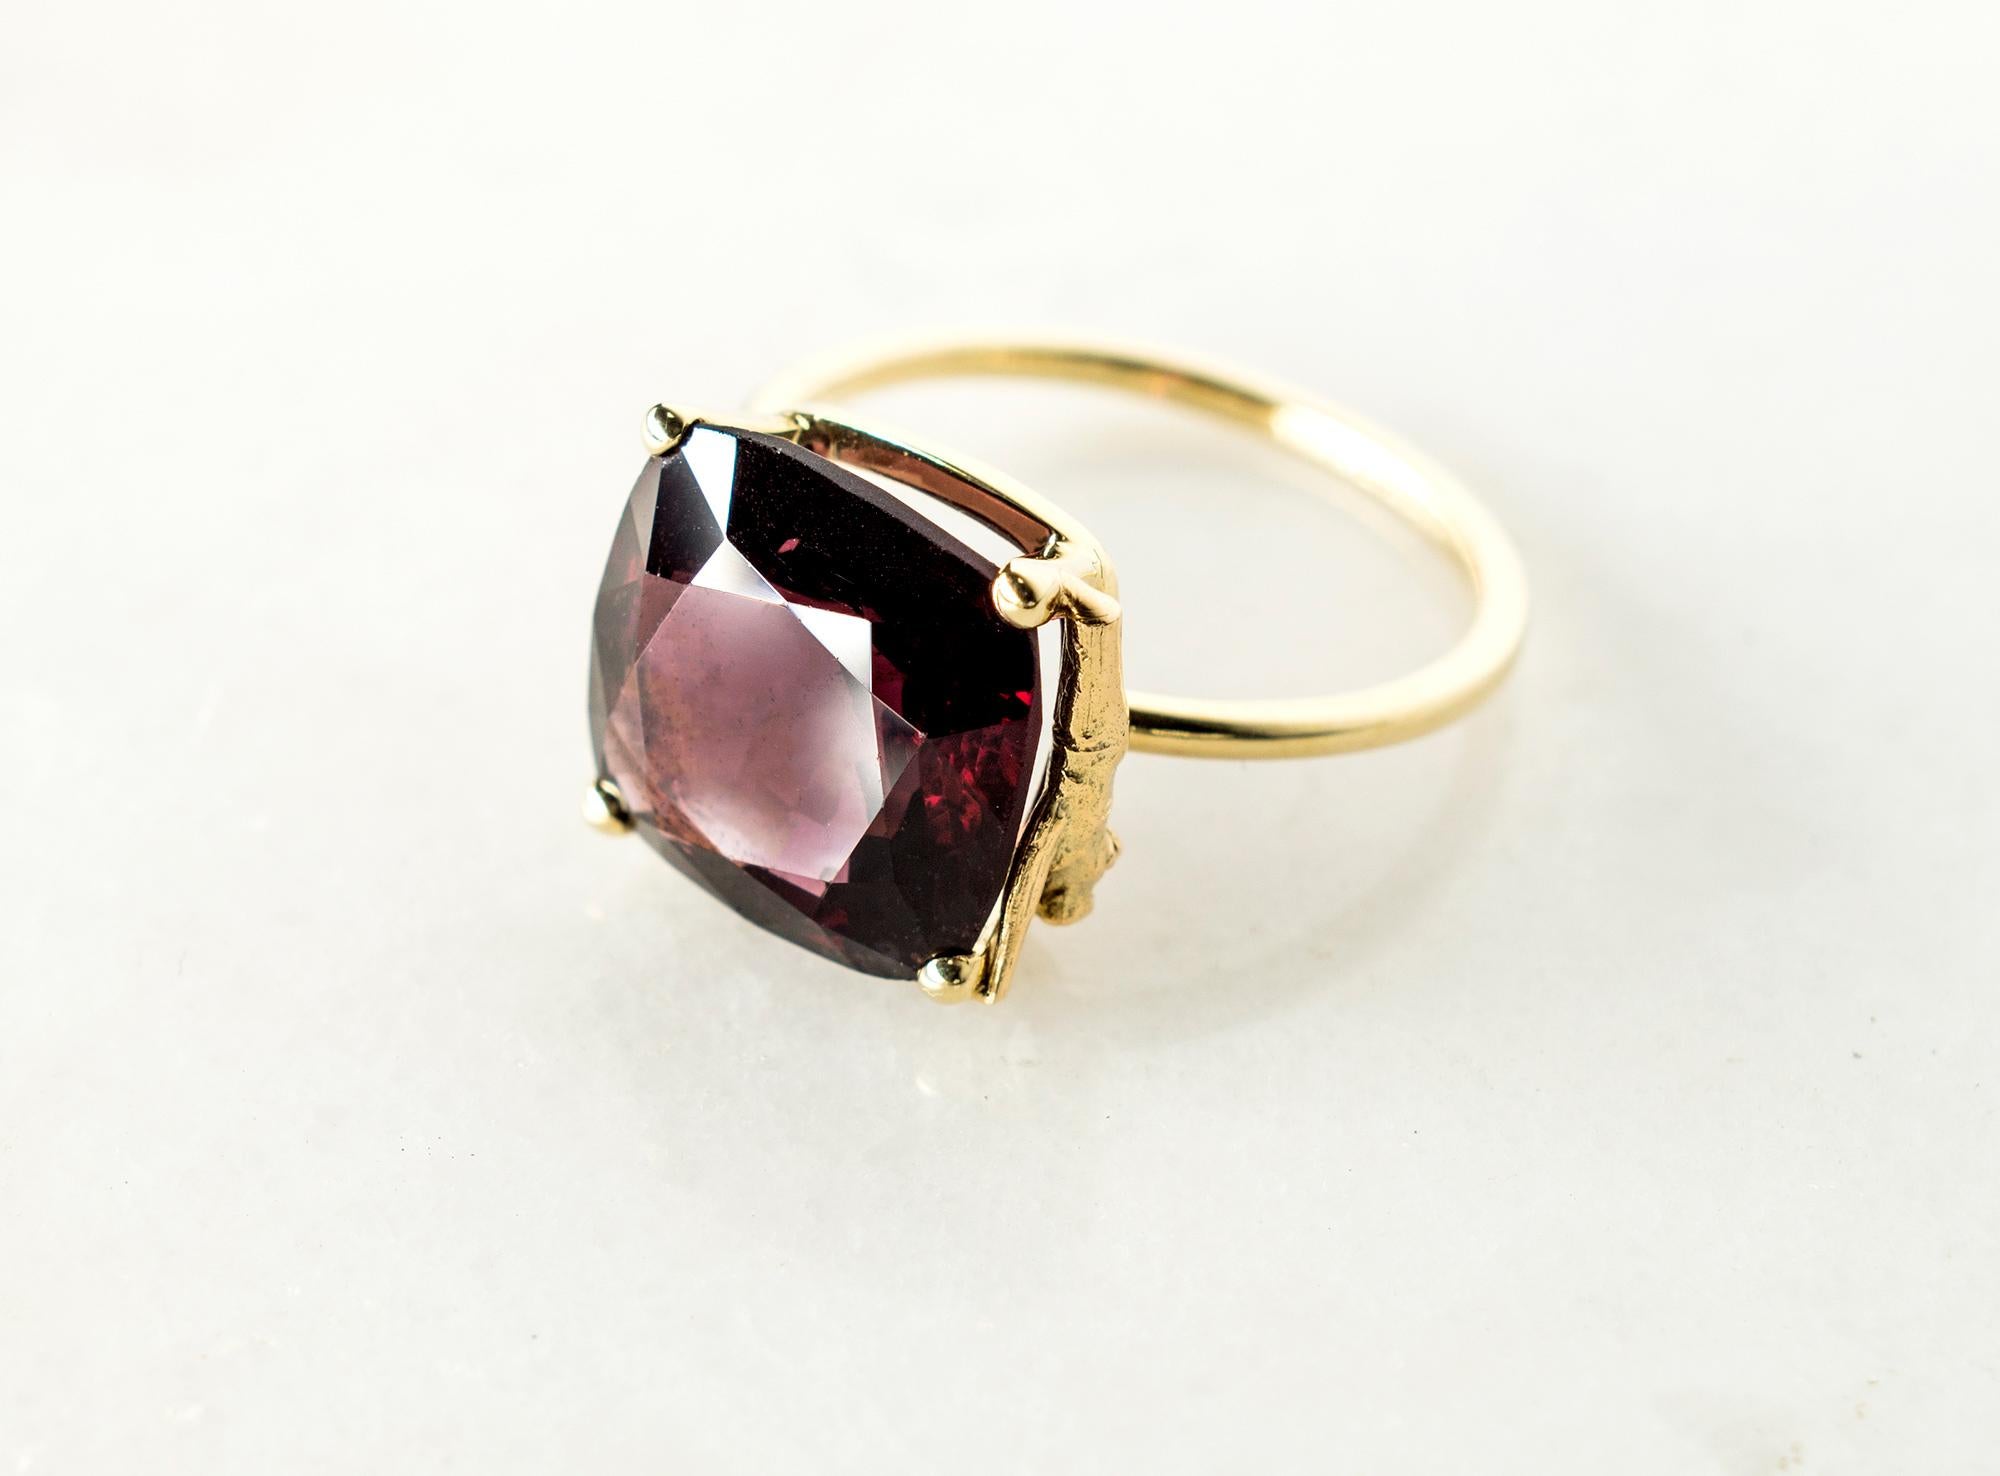 This contemporary ring is made of 14 karat yellow gold and features a cushion-cut red garnet. It is part of the Tea collection, which was featured in Vogue UA. The ring will be custom made to fit your size.

The ring is easy to wear and the large